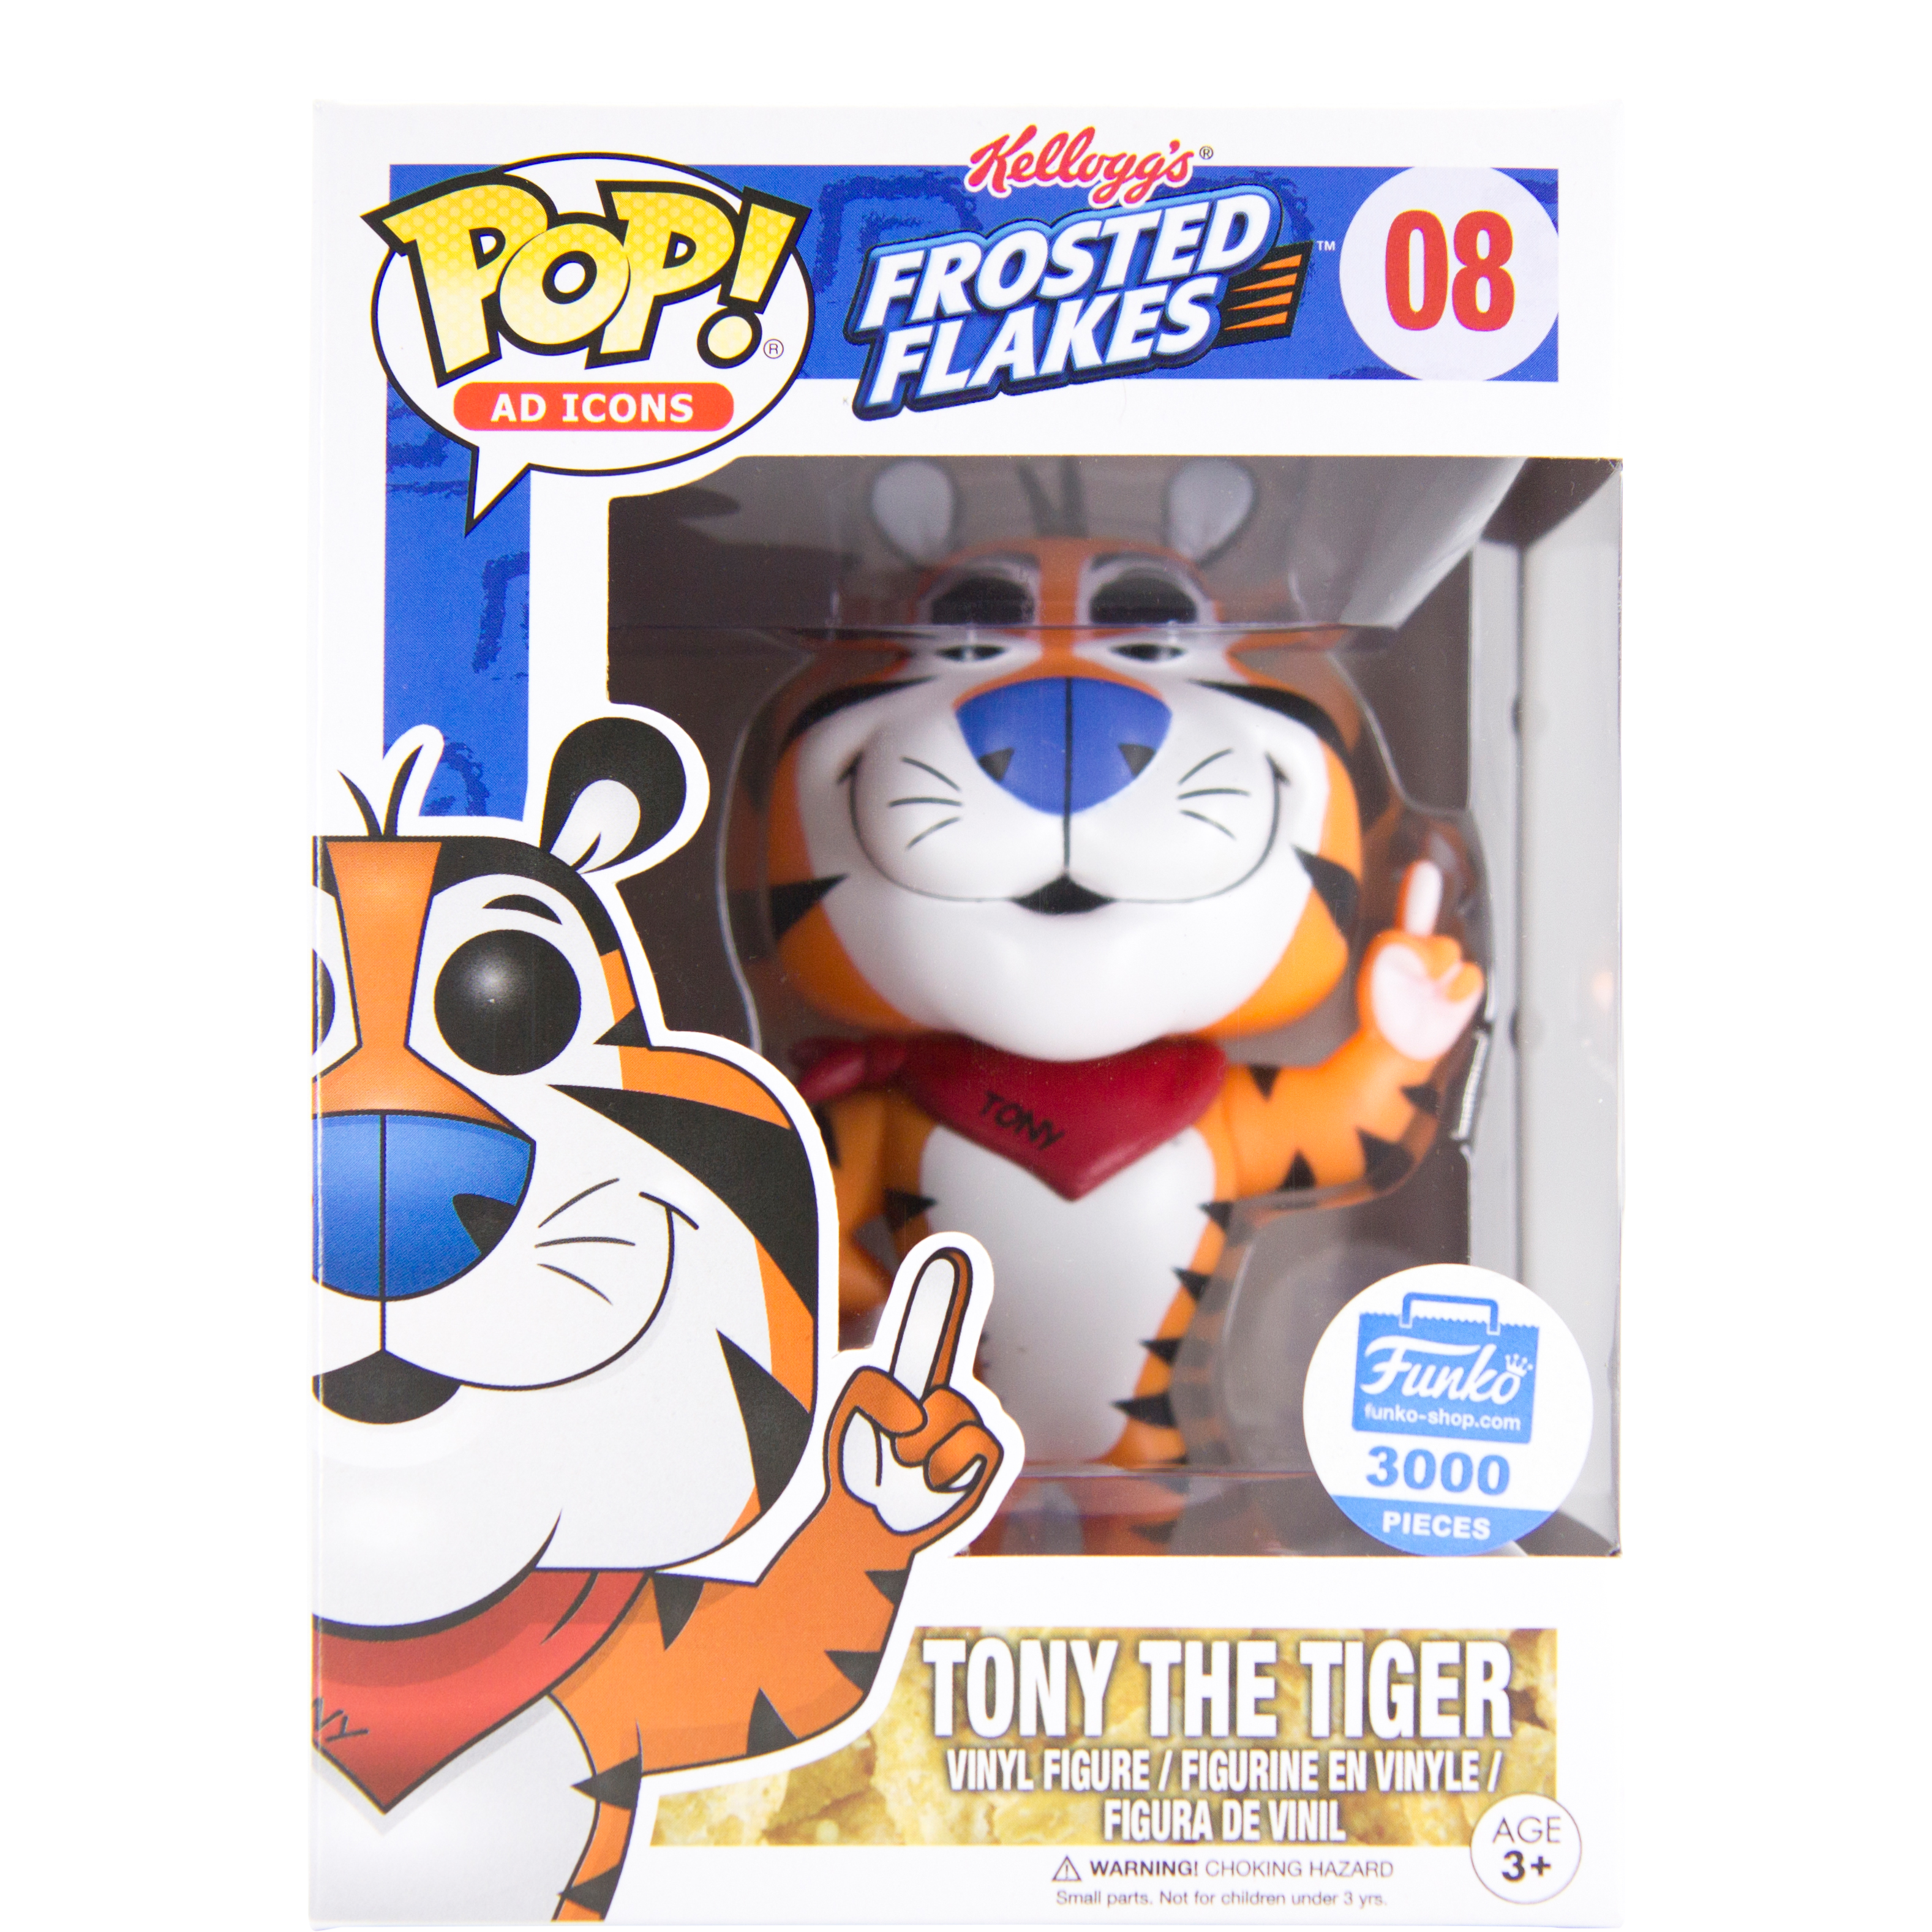 FROSTED FLAKES MIC THEY'RE GR-R-REAT!!! Details about   FUNKO POP AD ICONS: TONY TIGER #08 